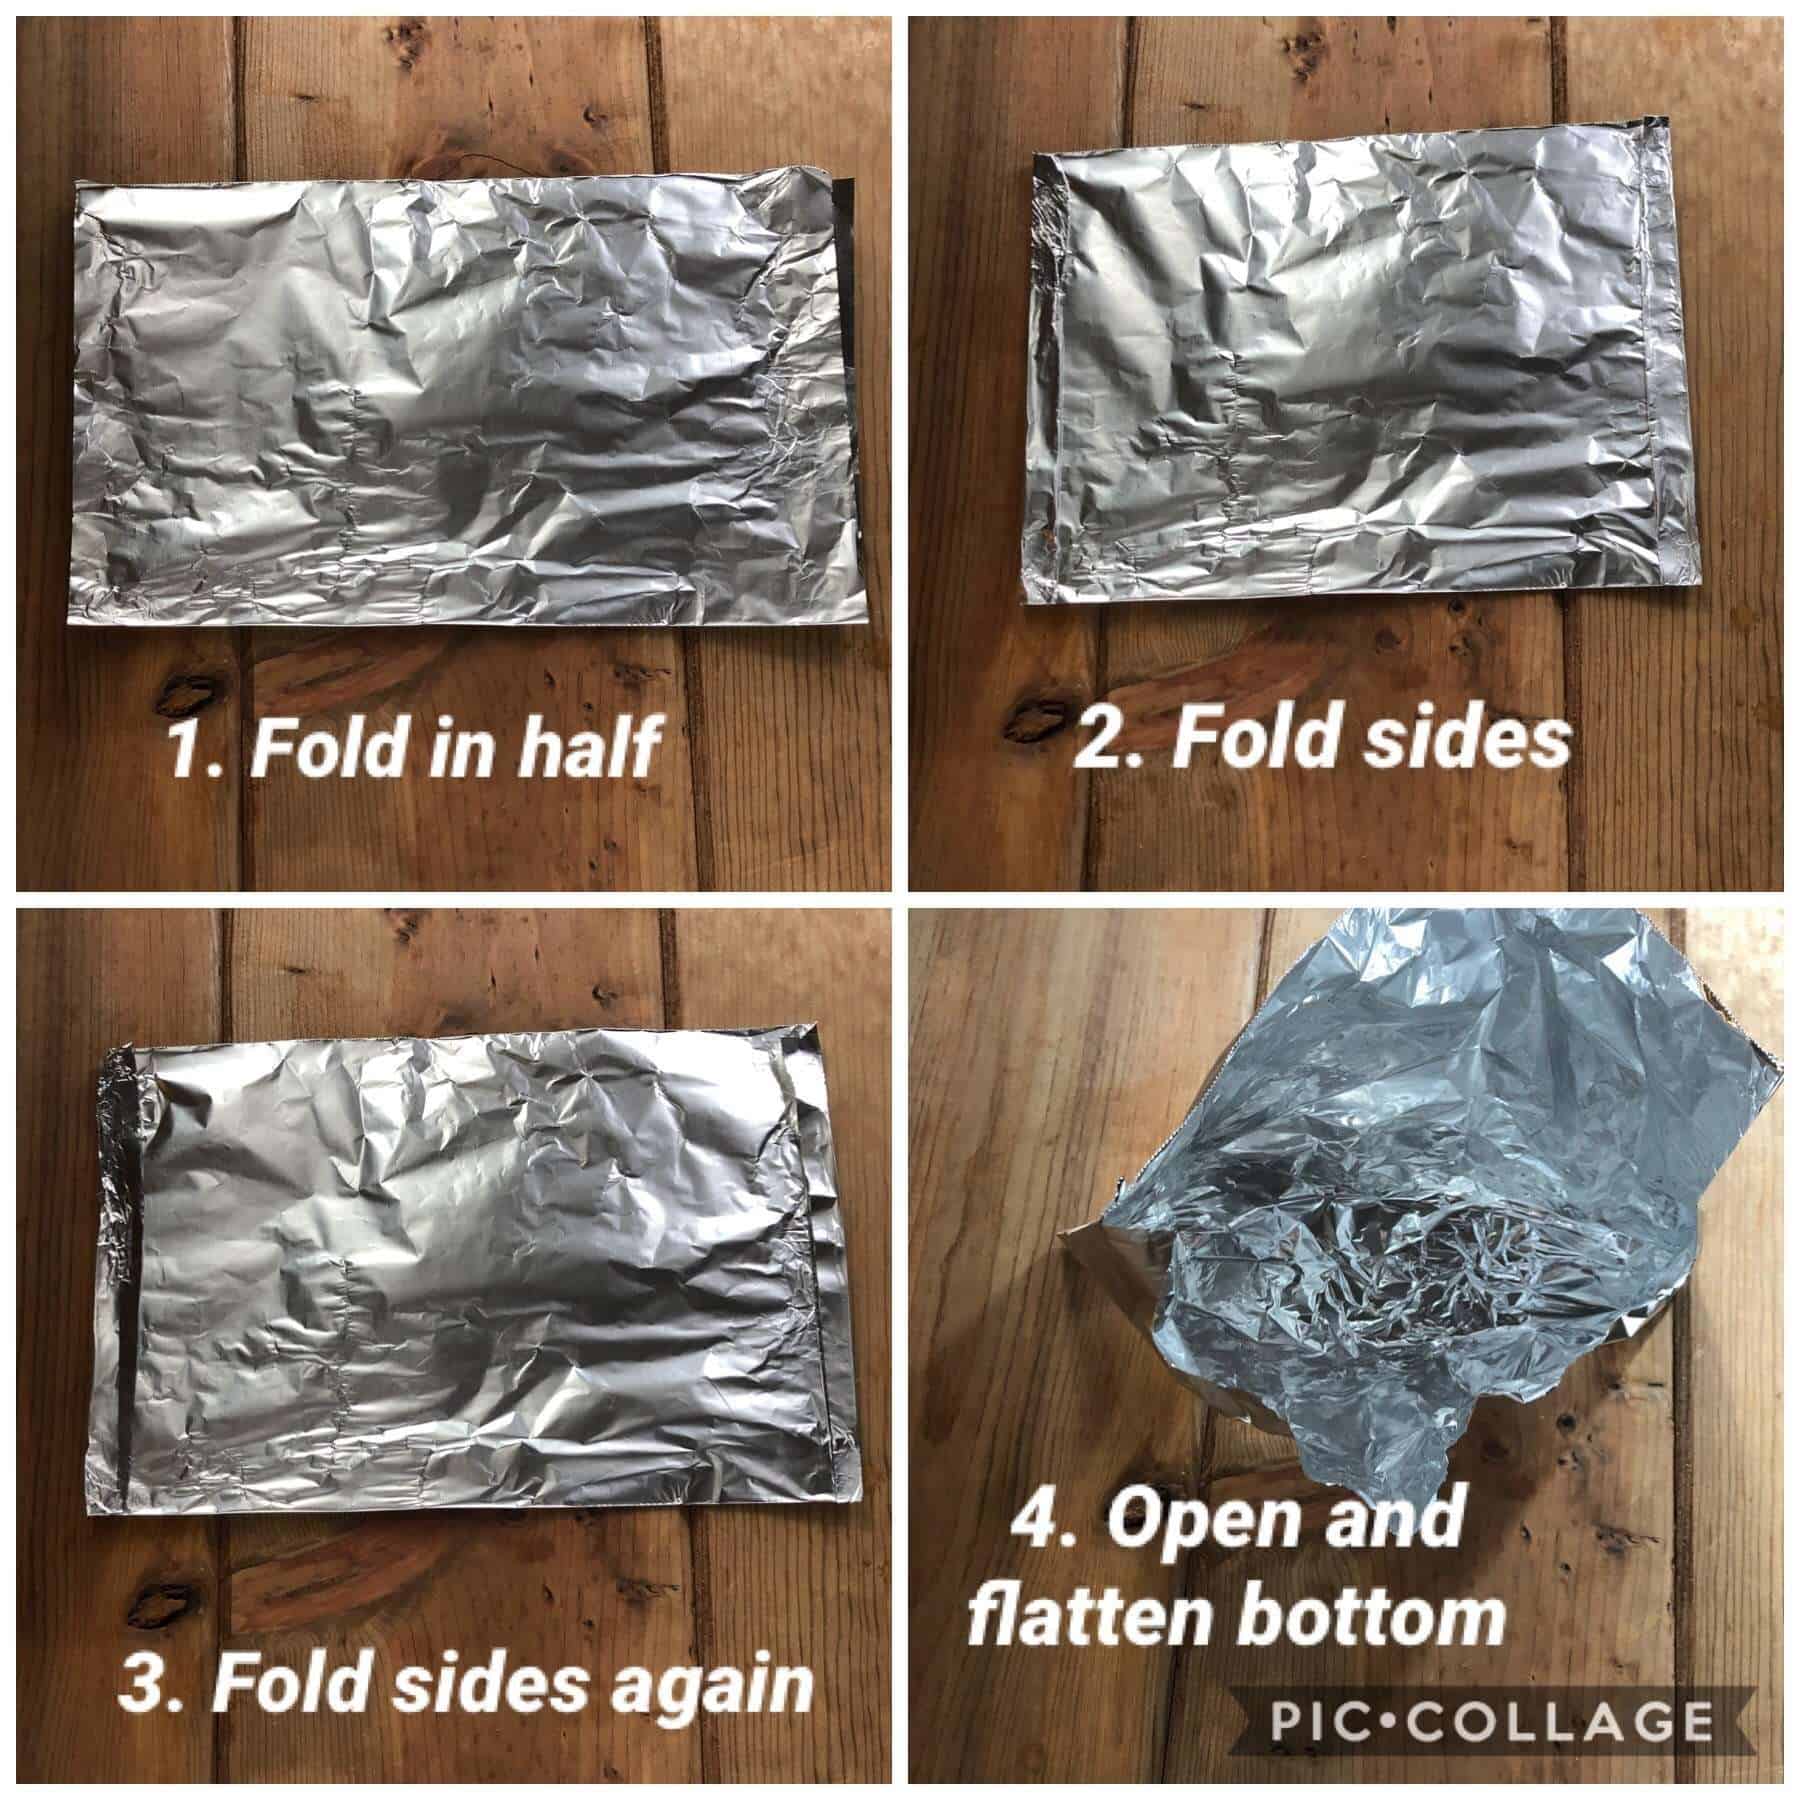 How to fold a foil pack